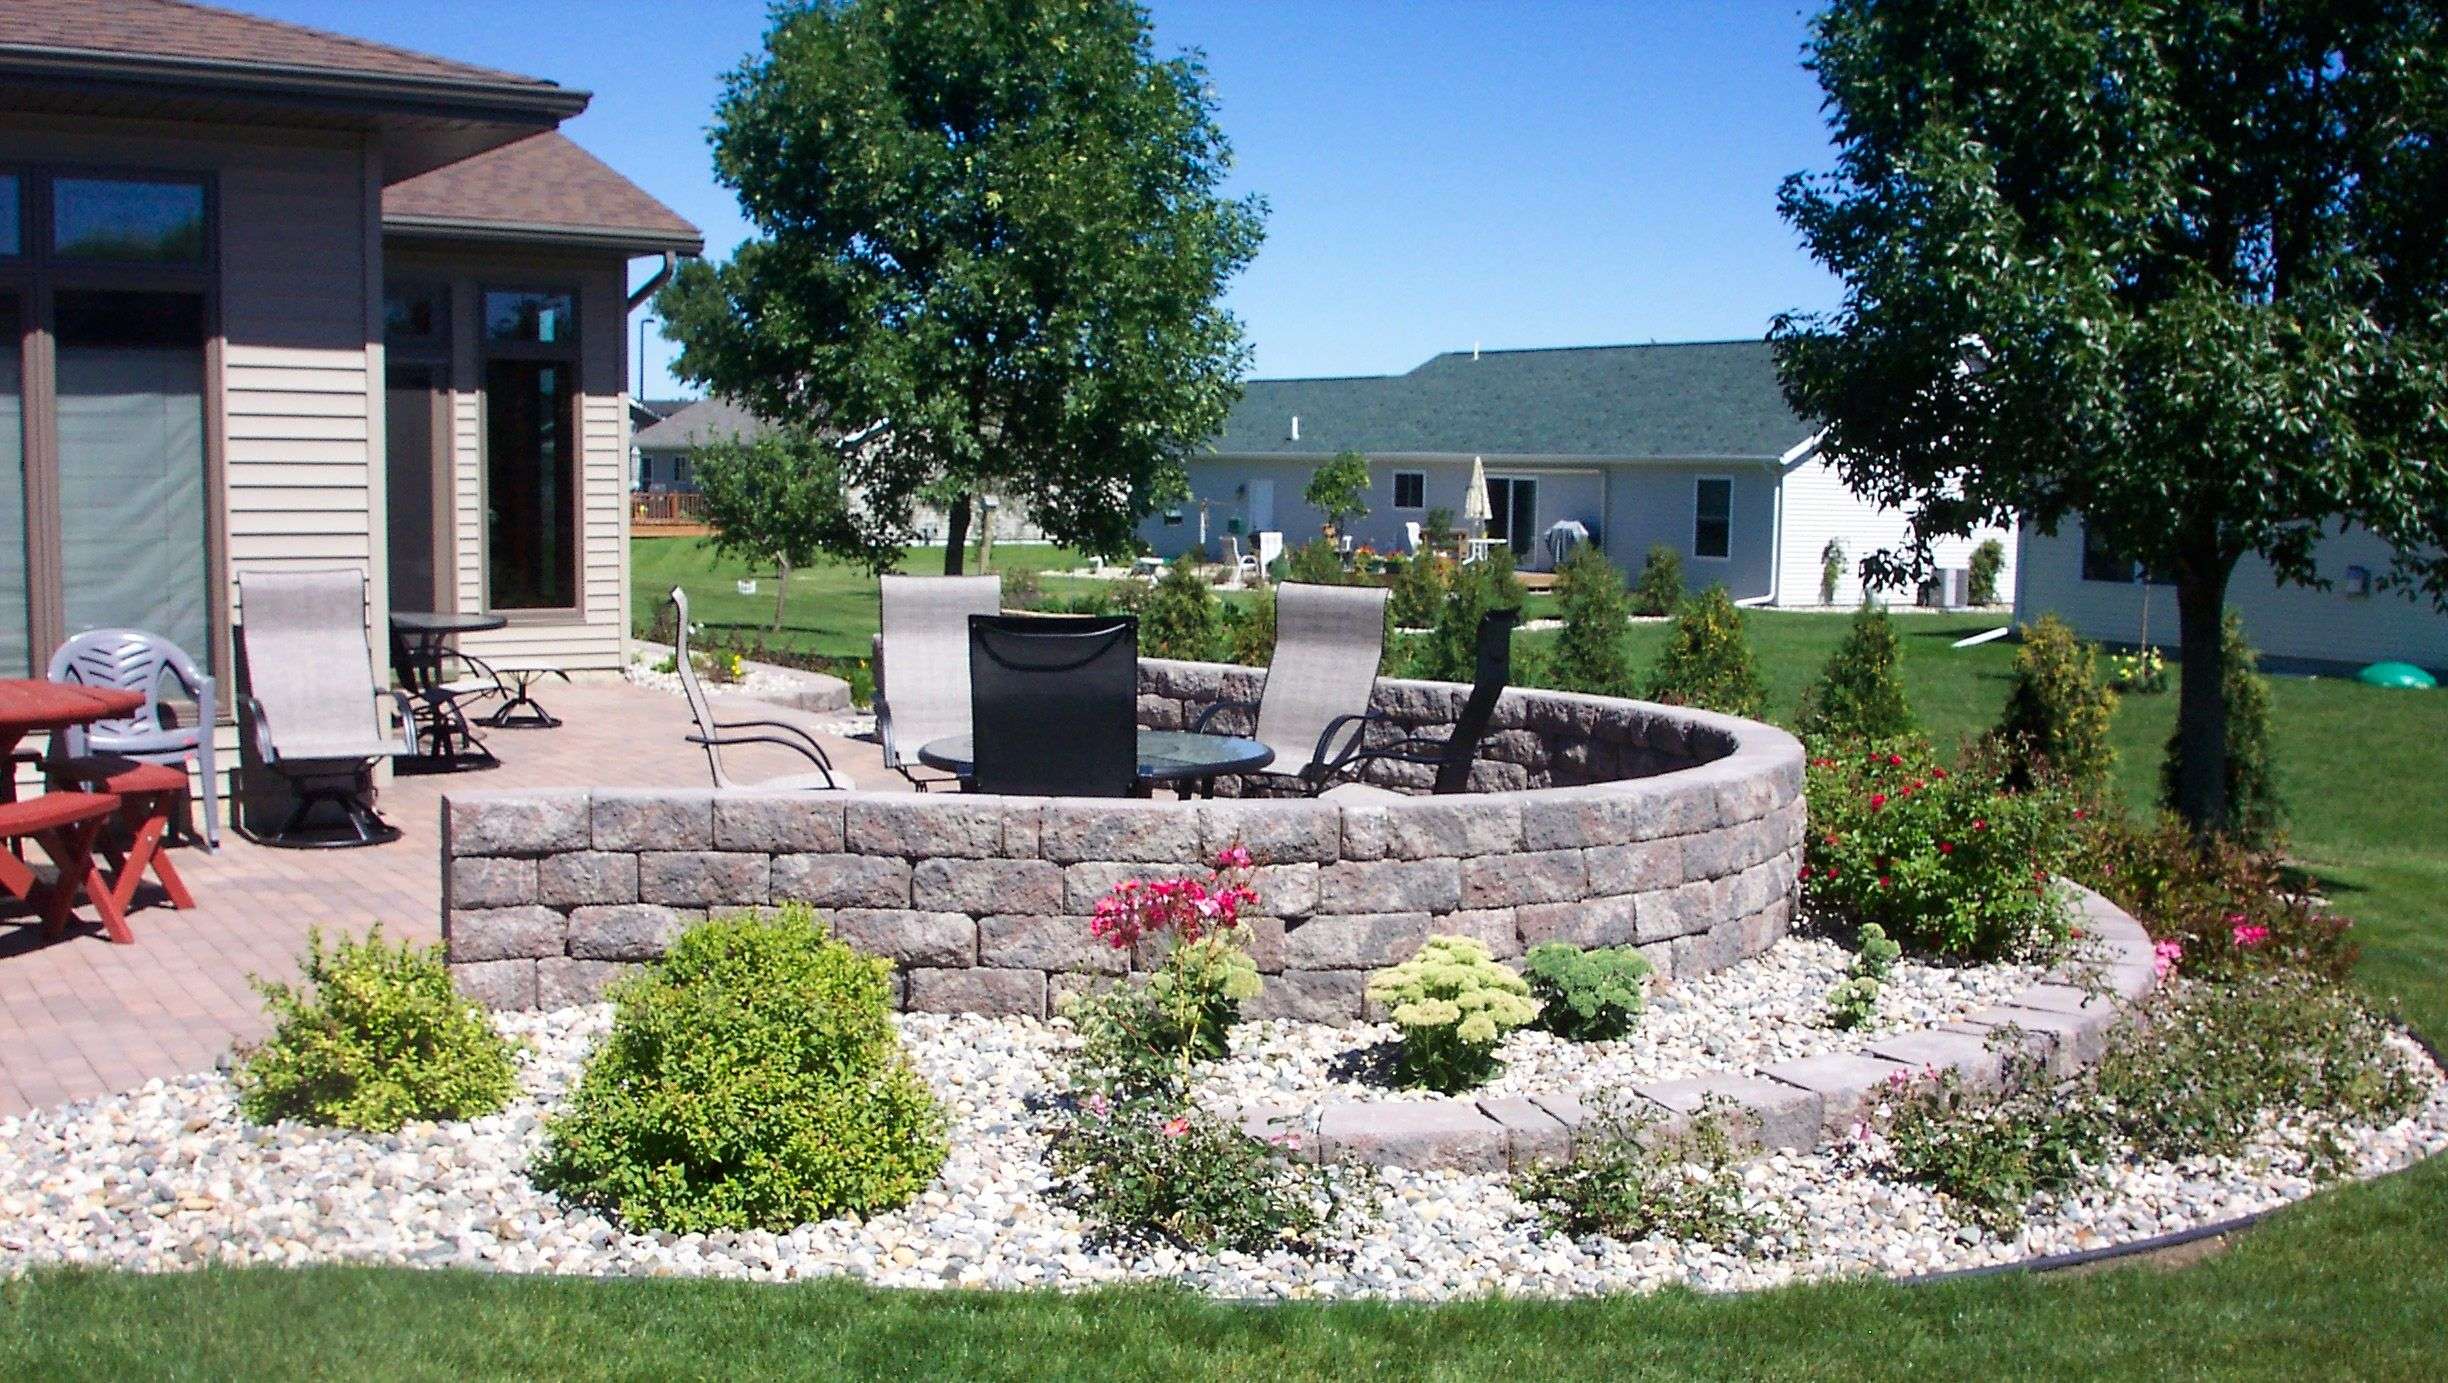 This retaining wall is a great way to enclose a patio ...